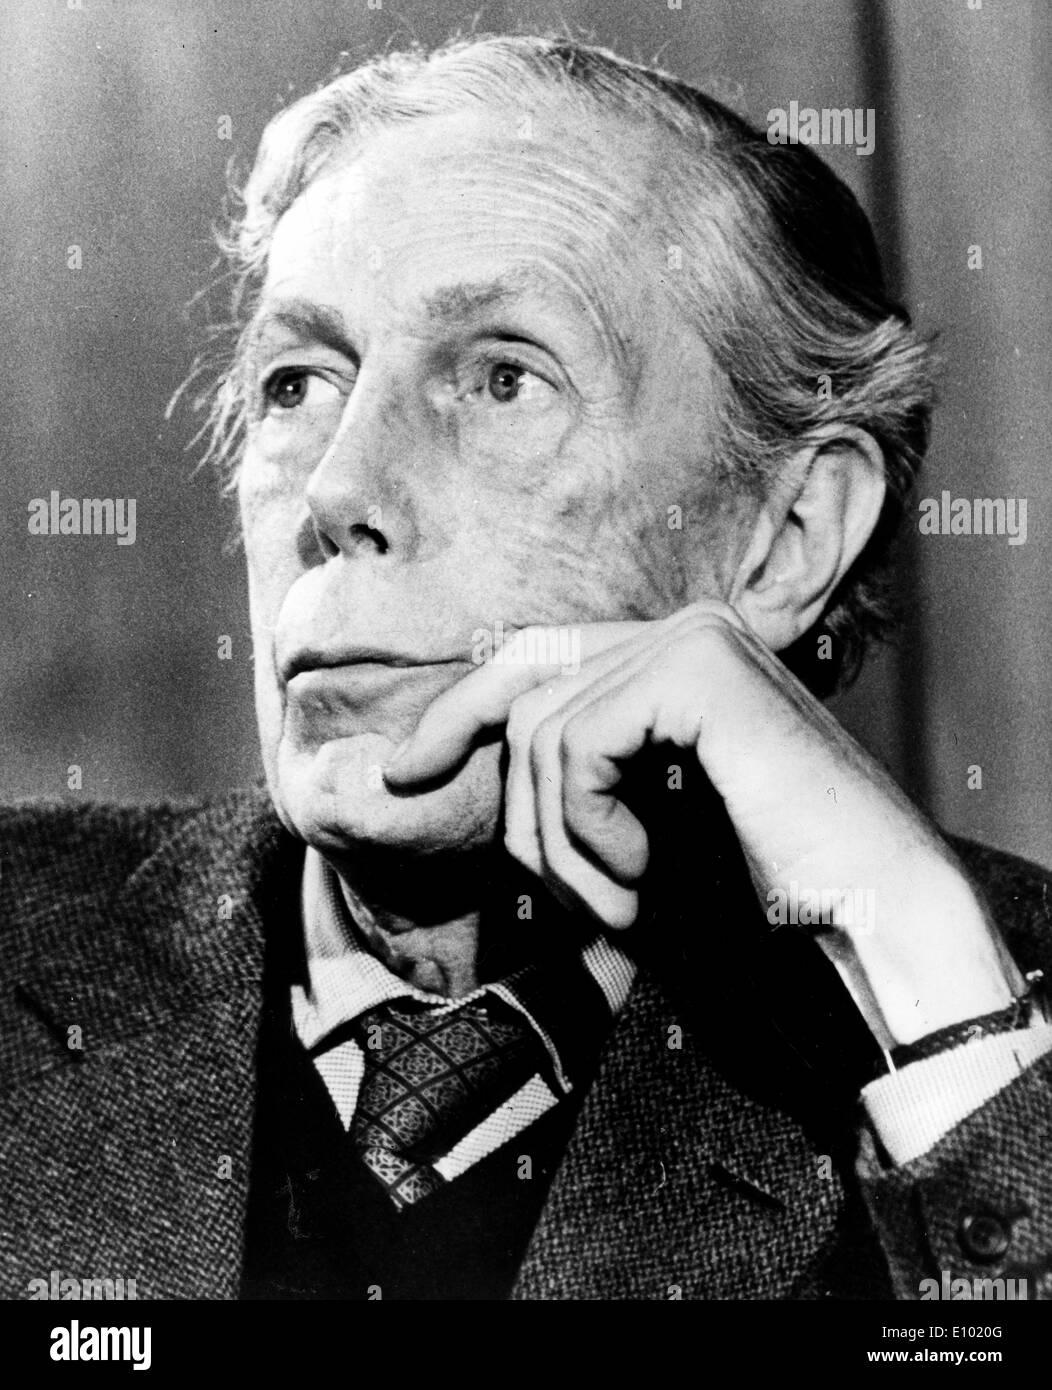 ANTONY BLUNT KCVO, was a British art historian who was exposed as a Soviet spy late in his life Stock Photo